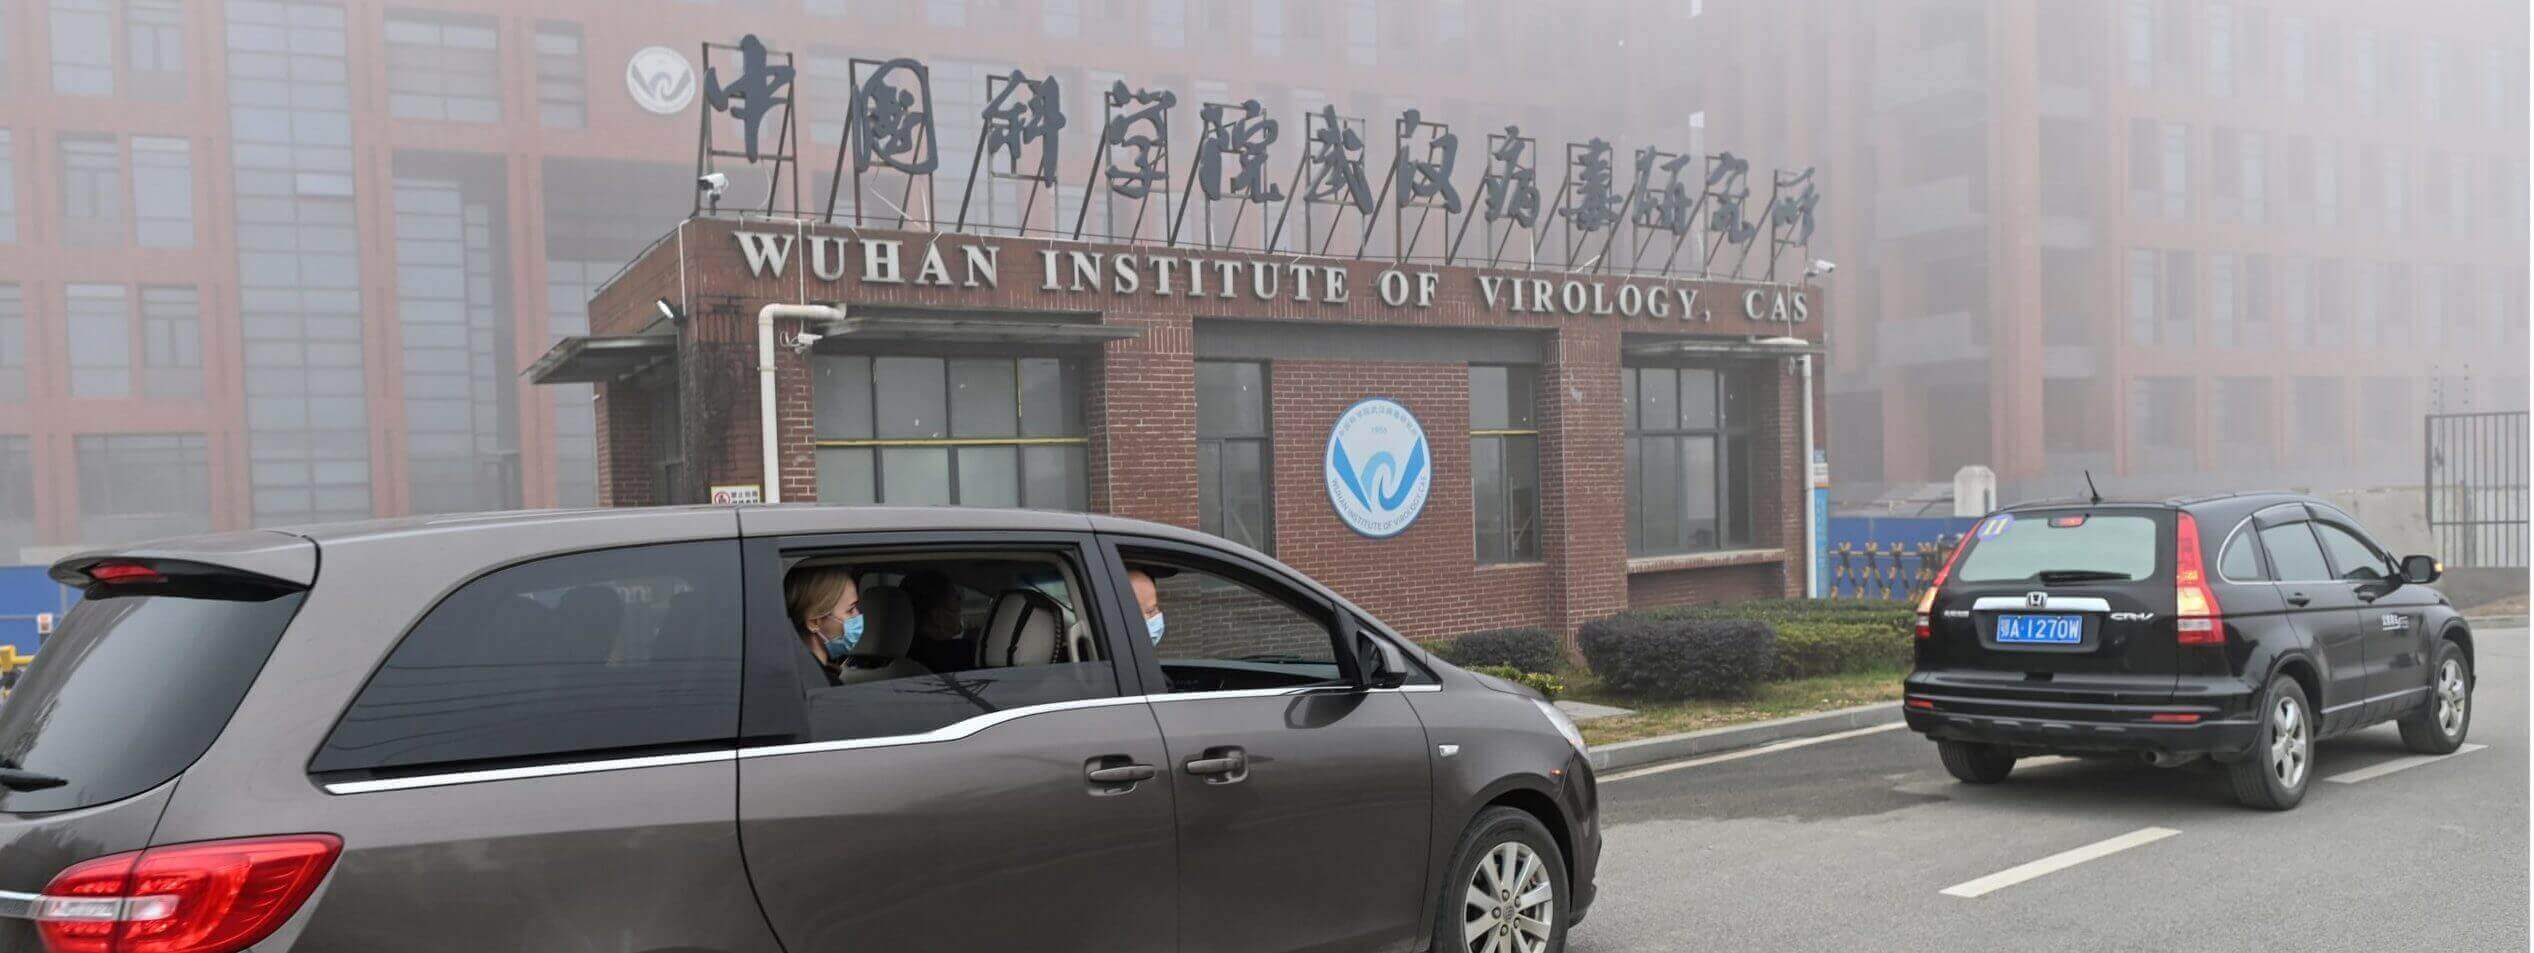 IG Probe Launched to Investigate Possible Theft of U.S. Taxpayer Funds For Wuhan Lab Research Projects › American Greatness